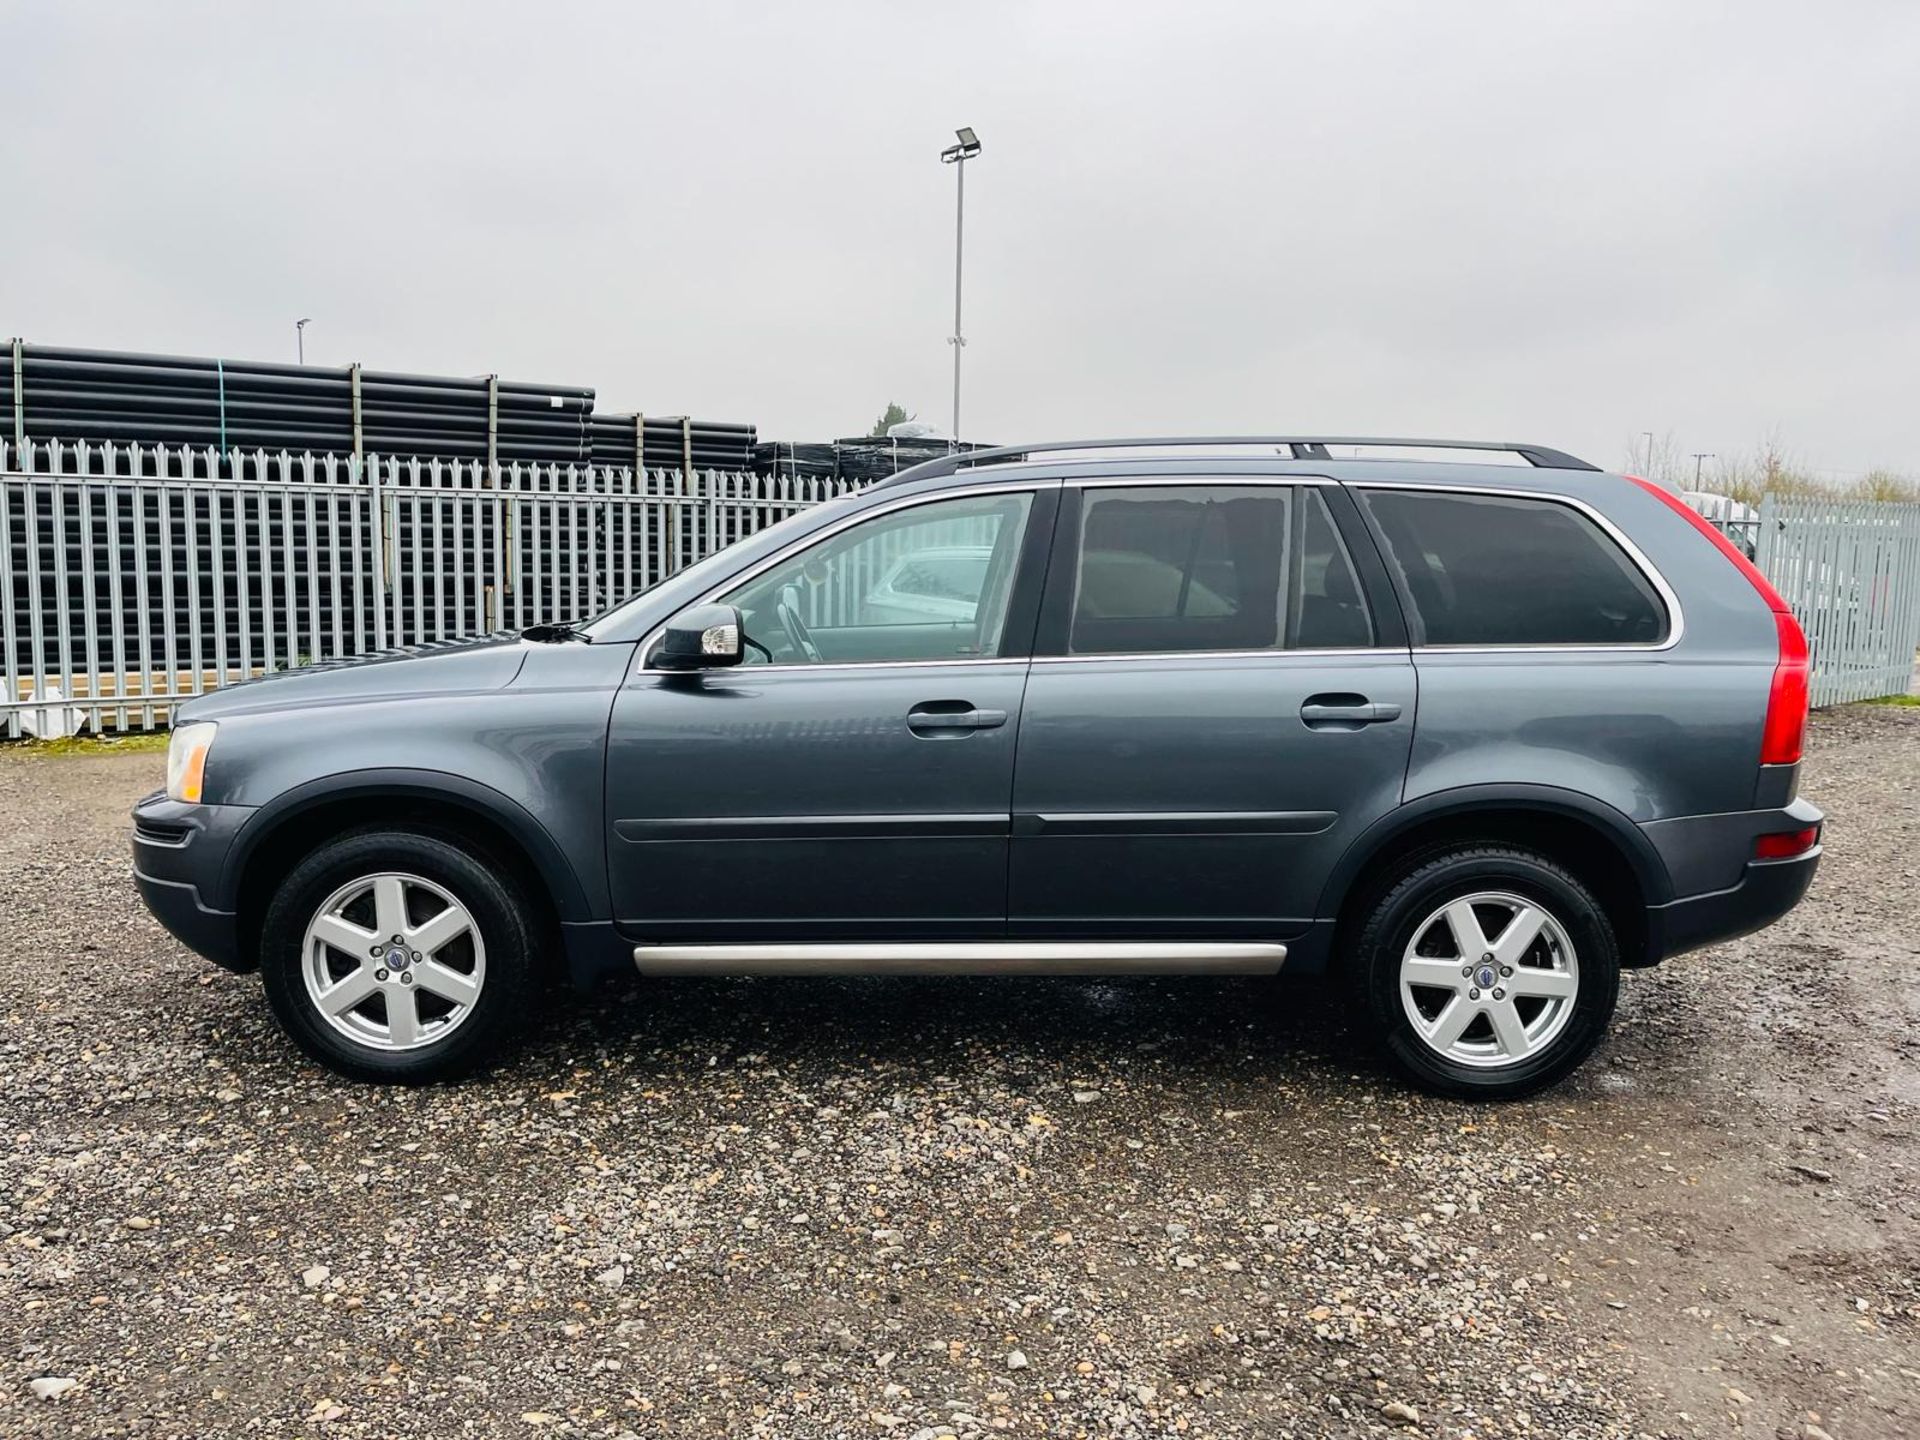 ** ON SALE ** Volvo Xc90 Active Automatic D5 185 Geartronic -Air Conditioning -Bluetooth Handsfree - Image 4 of 36